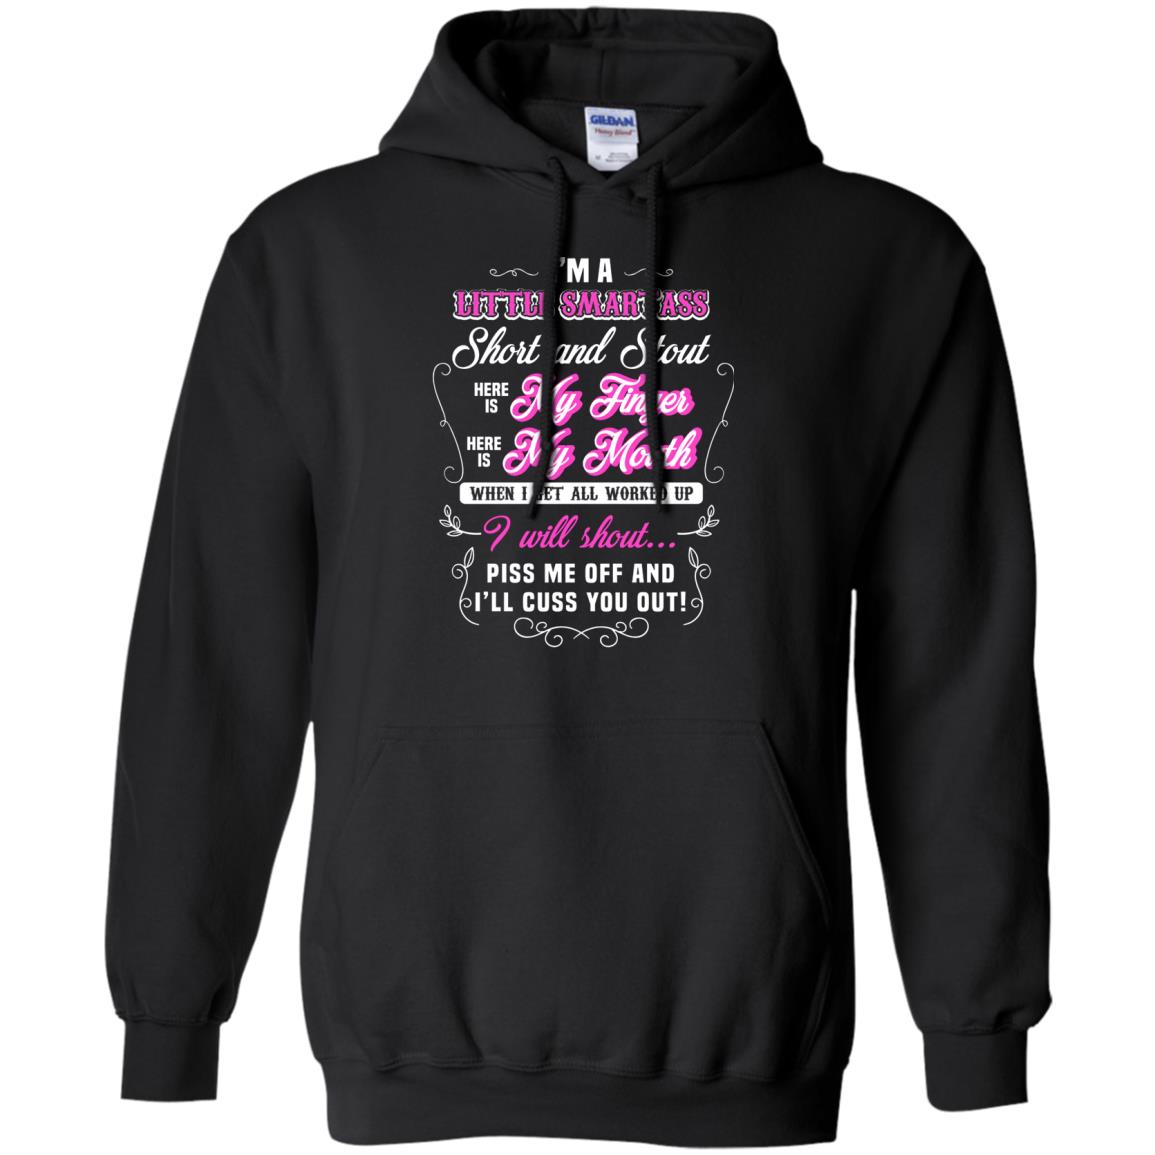 I_m A Little Smart Ass Short And Stout Here Is My Finger Here Is My Mouth When I Get All Worked Up I Will Shout Piss Me Off And I_ll Cuss You OutG185 Gildan Pullover Hoodie 8 oz.